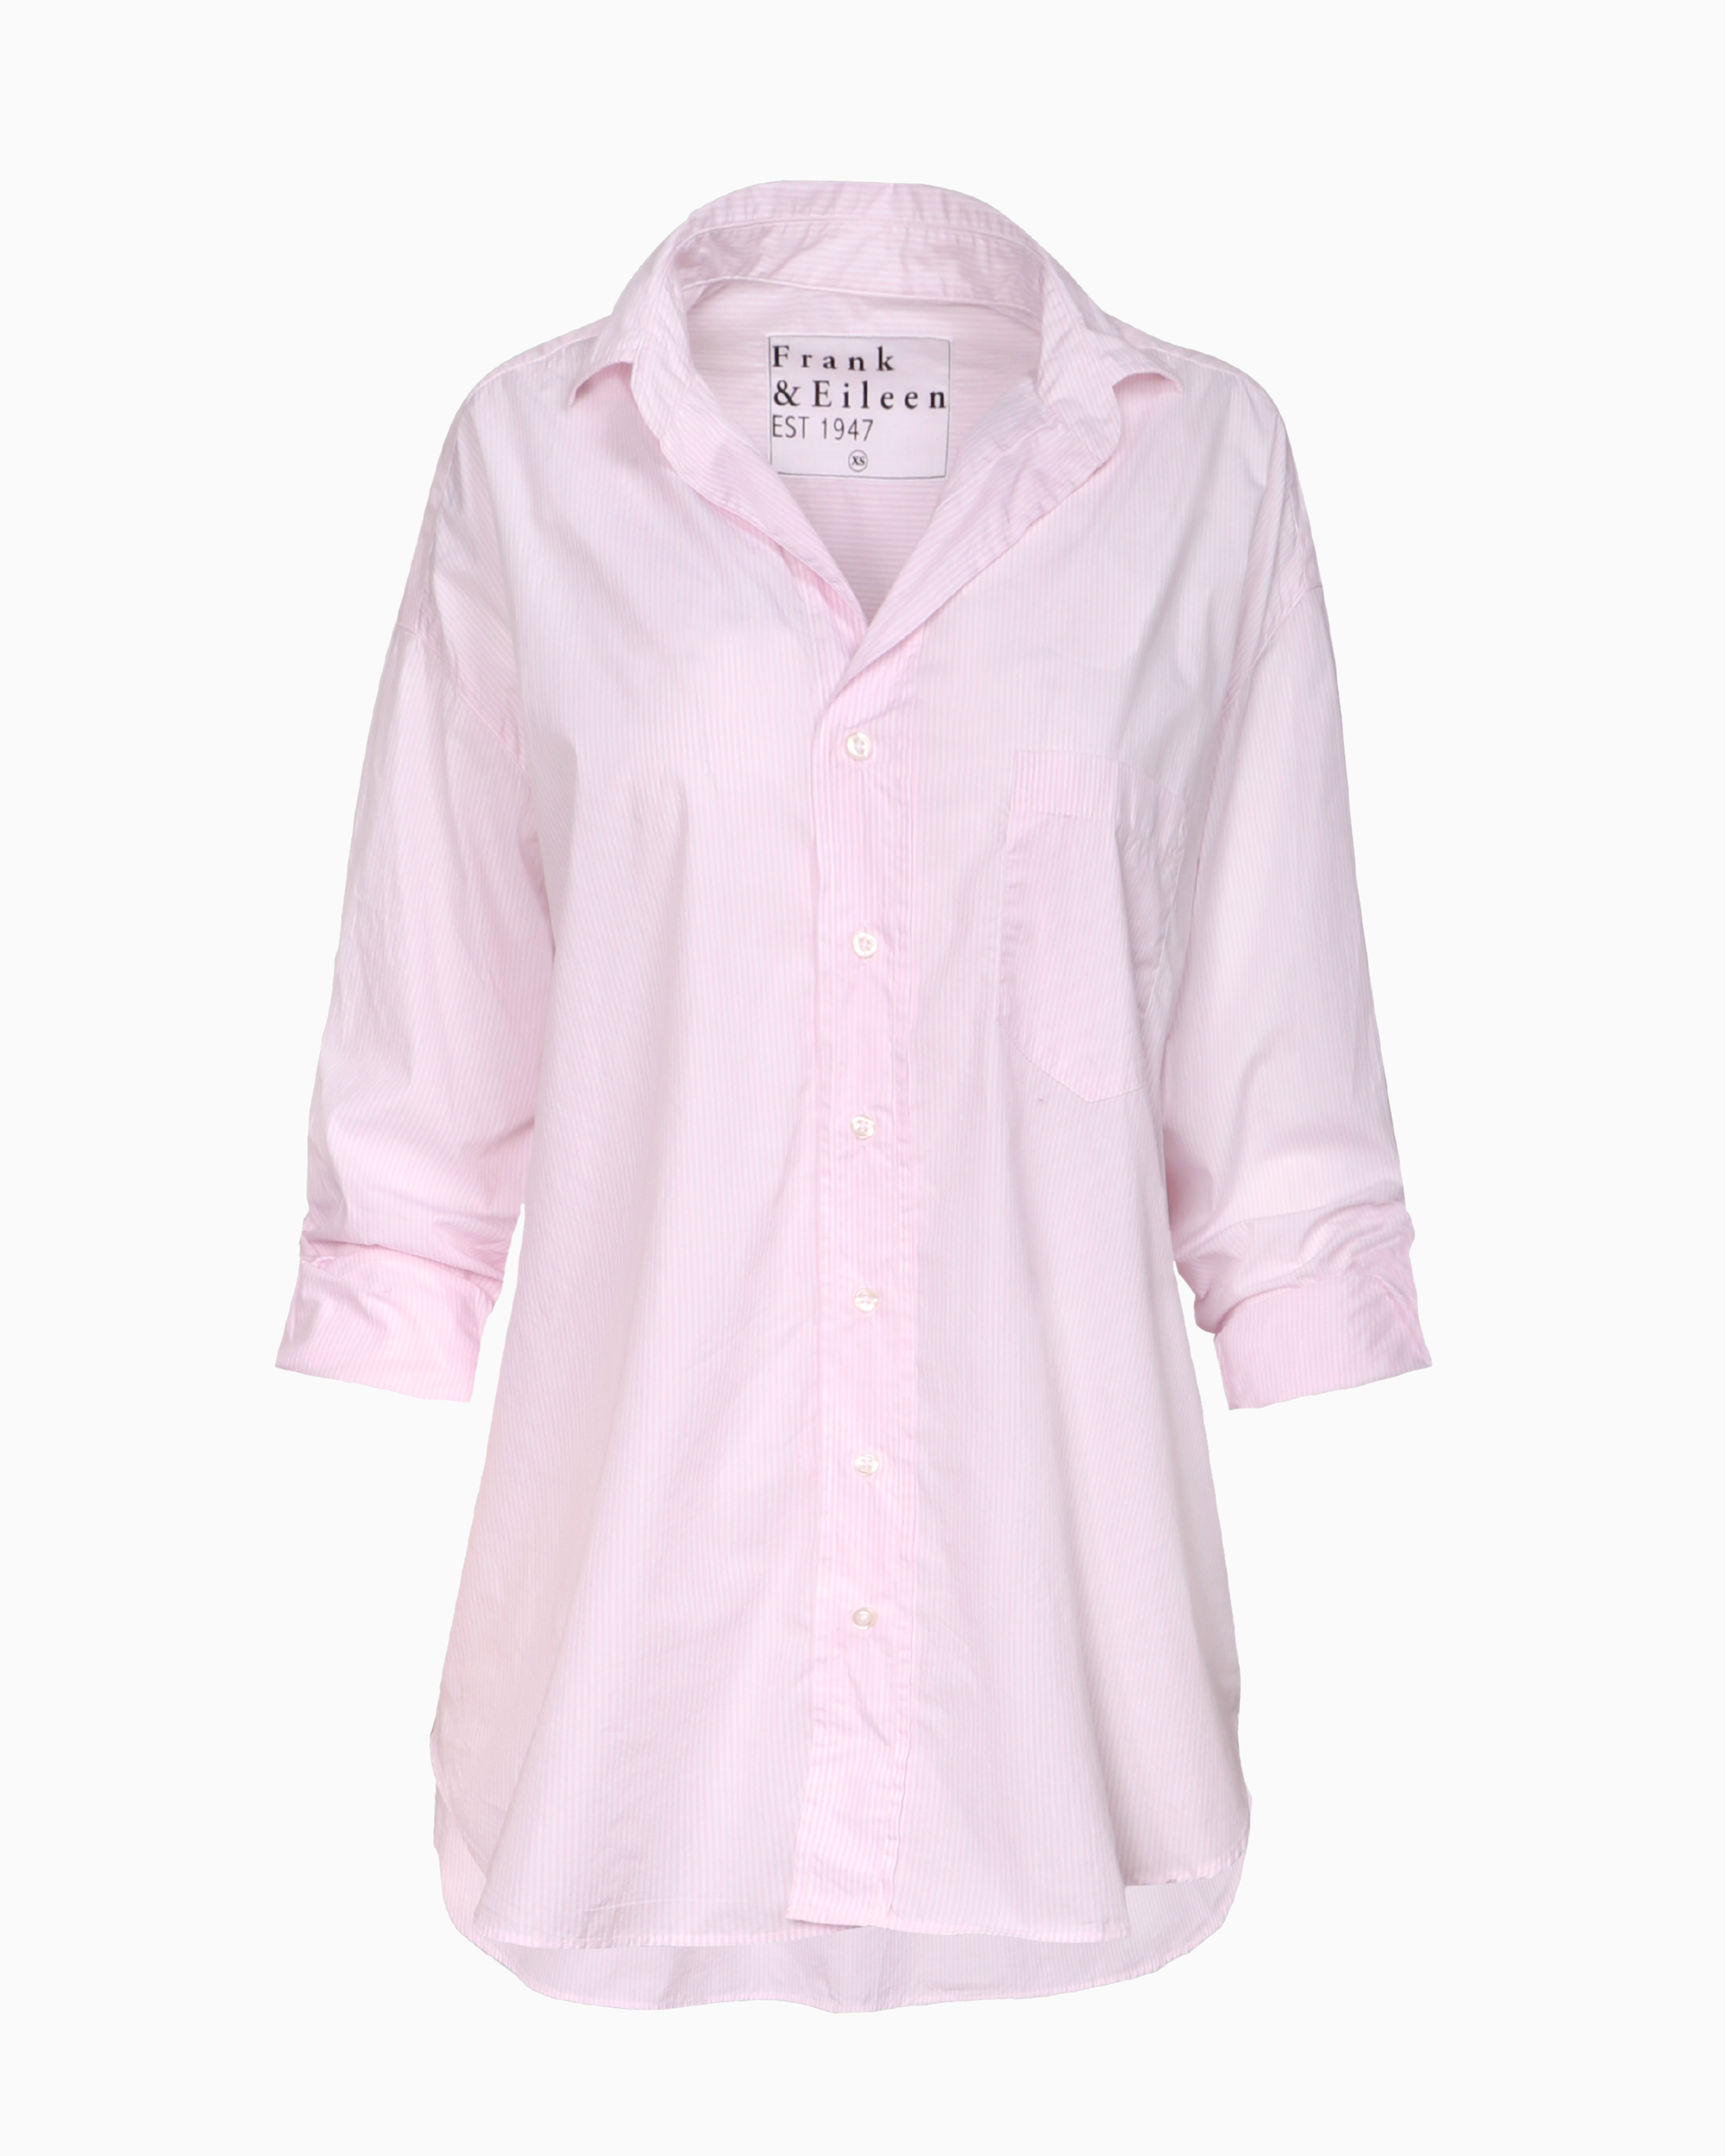 Frank & Eileen Shirley Button Up Top in Thin Pink Stripe